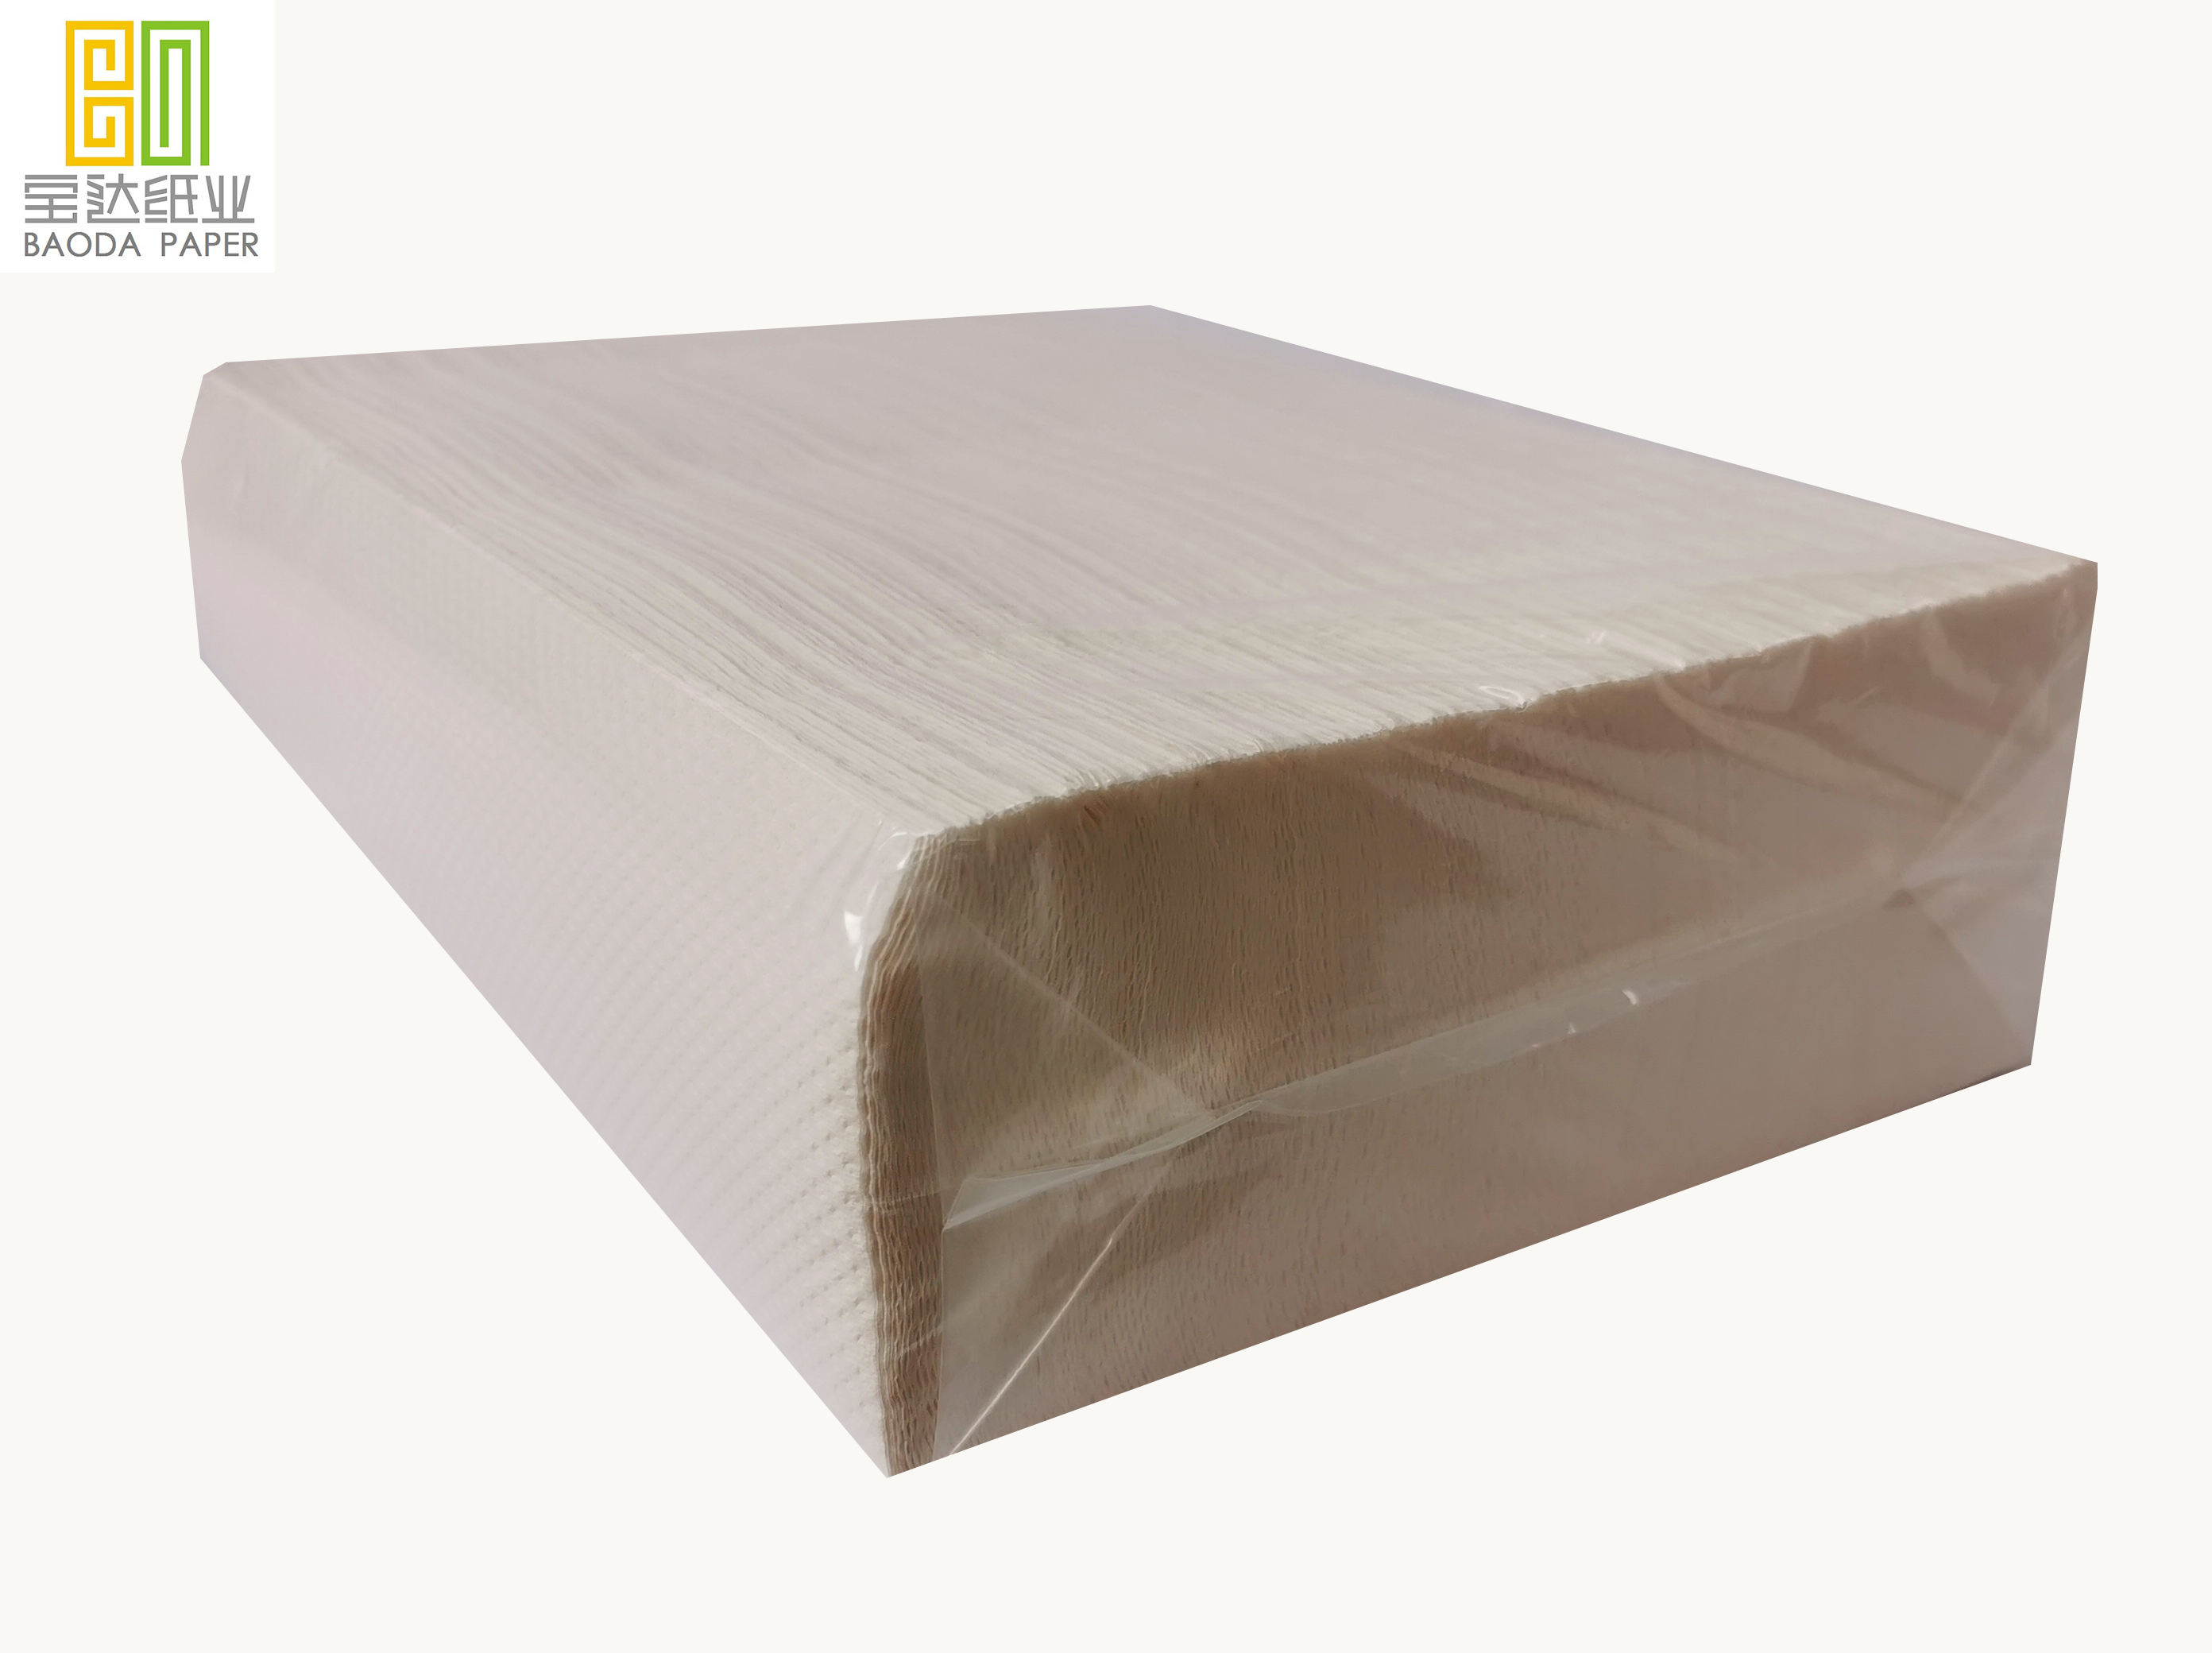 New Product Hot Sale Promotion tablet tissue tall fold napkin tall fold napkin paper napkins manufacturers